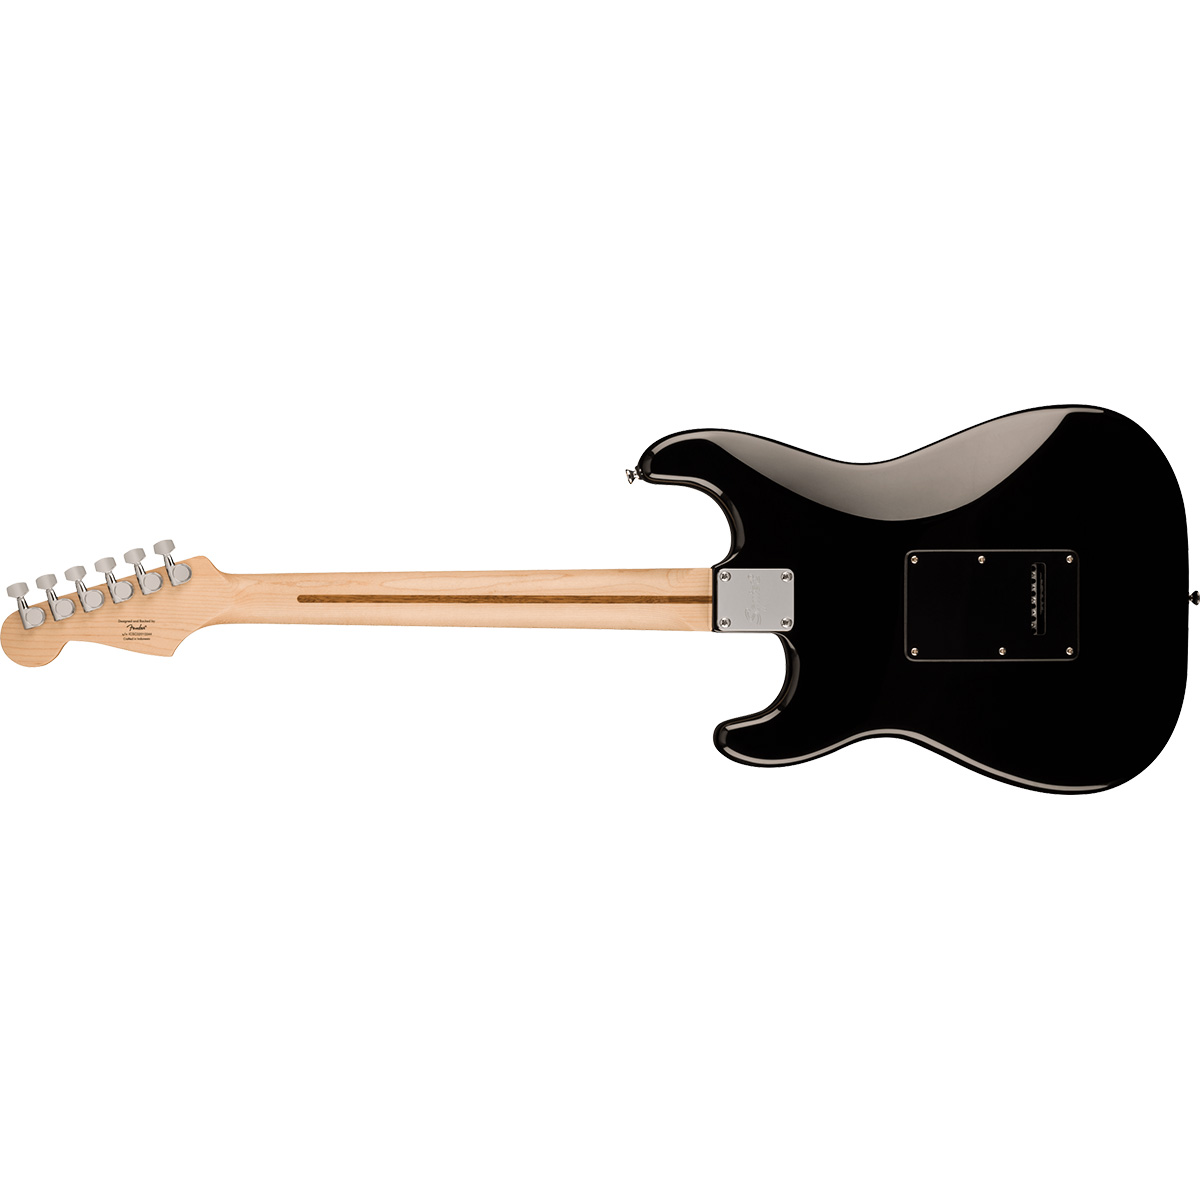 Squier by Fender SONIC STRATOCASTER HSS Black エレキギター初心者14 